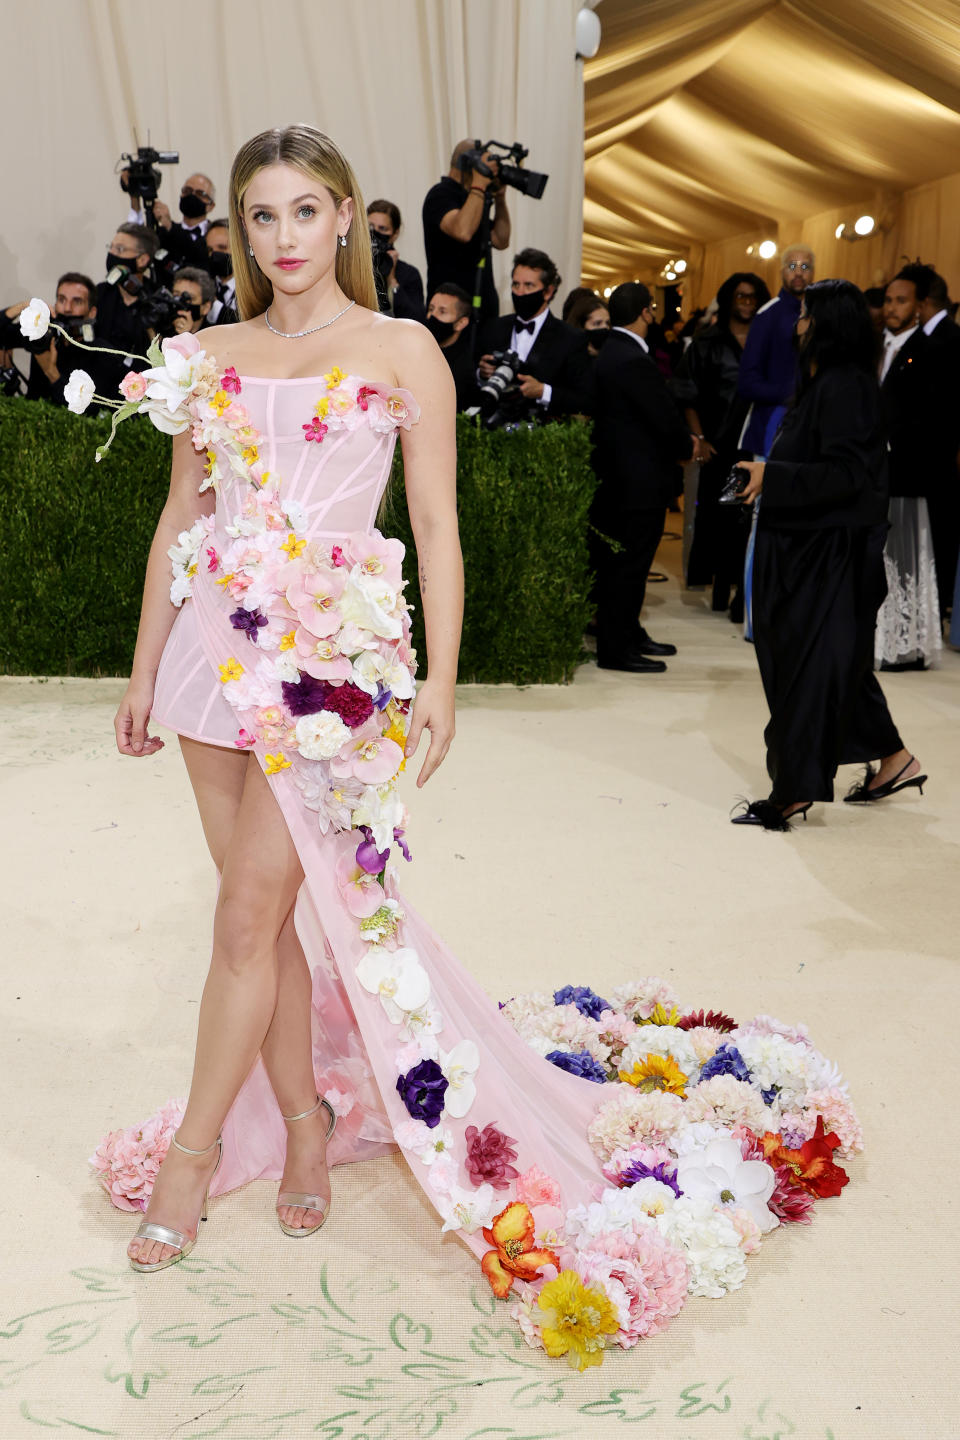 Lili Reinhart attends The 2021 Met Gala Celebrating In America: A Lexicon Of Fashion at Metropolitan Museum of Art on September 13, 2021 in New York City. (Getty Images)